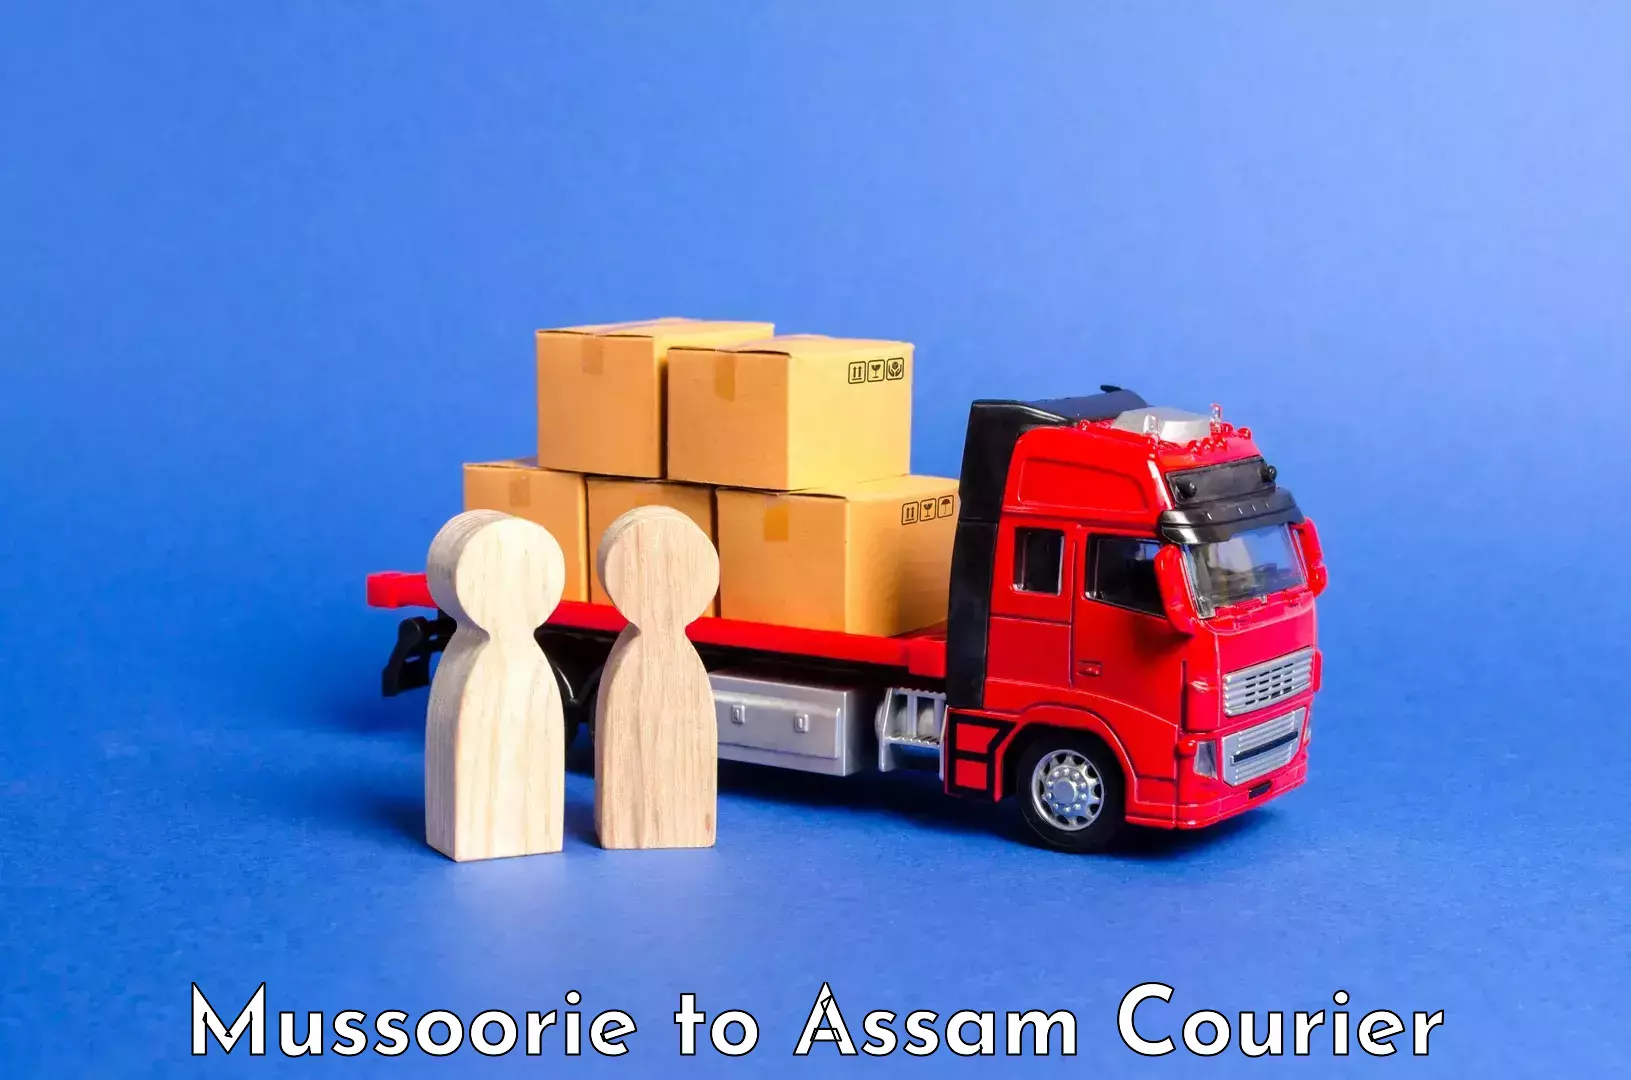 Baggage transport innovation Mussoorie to Assam